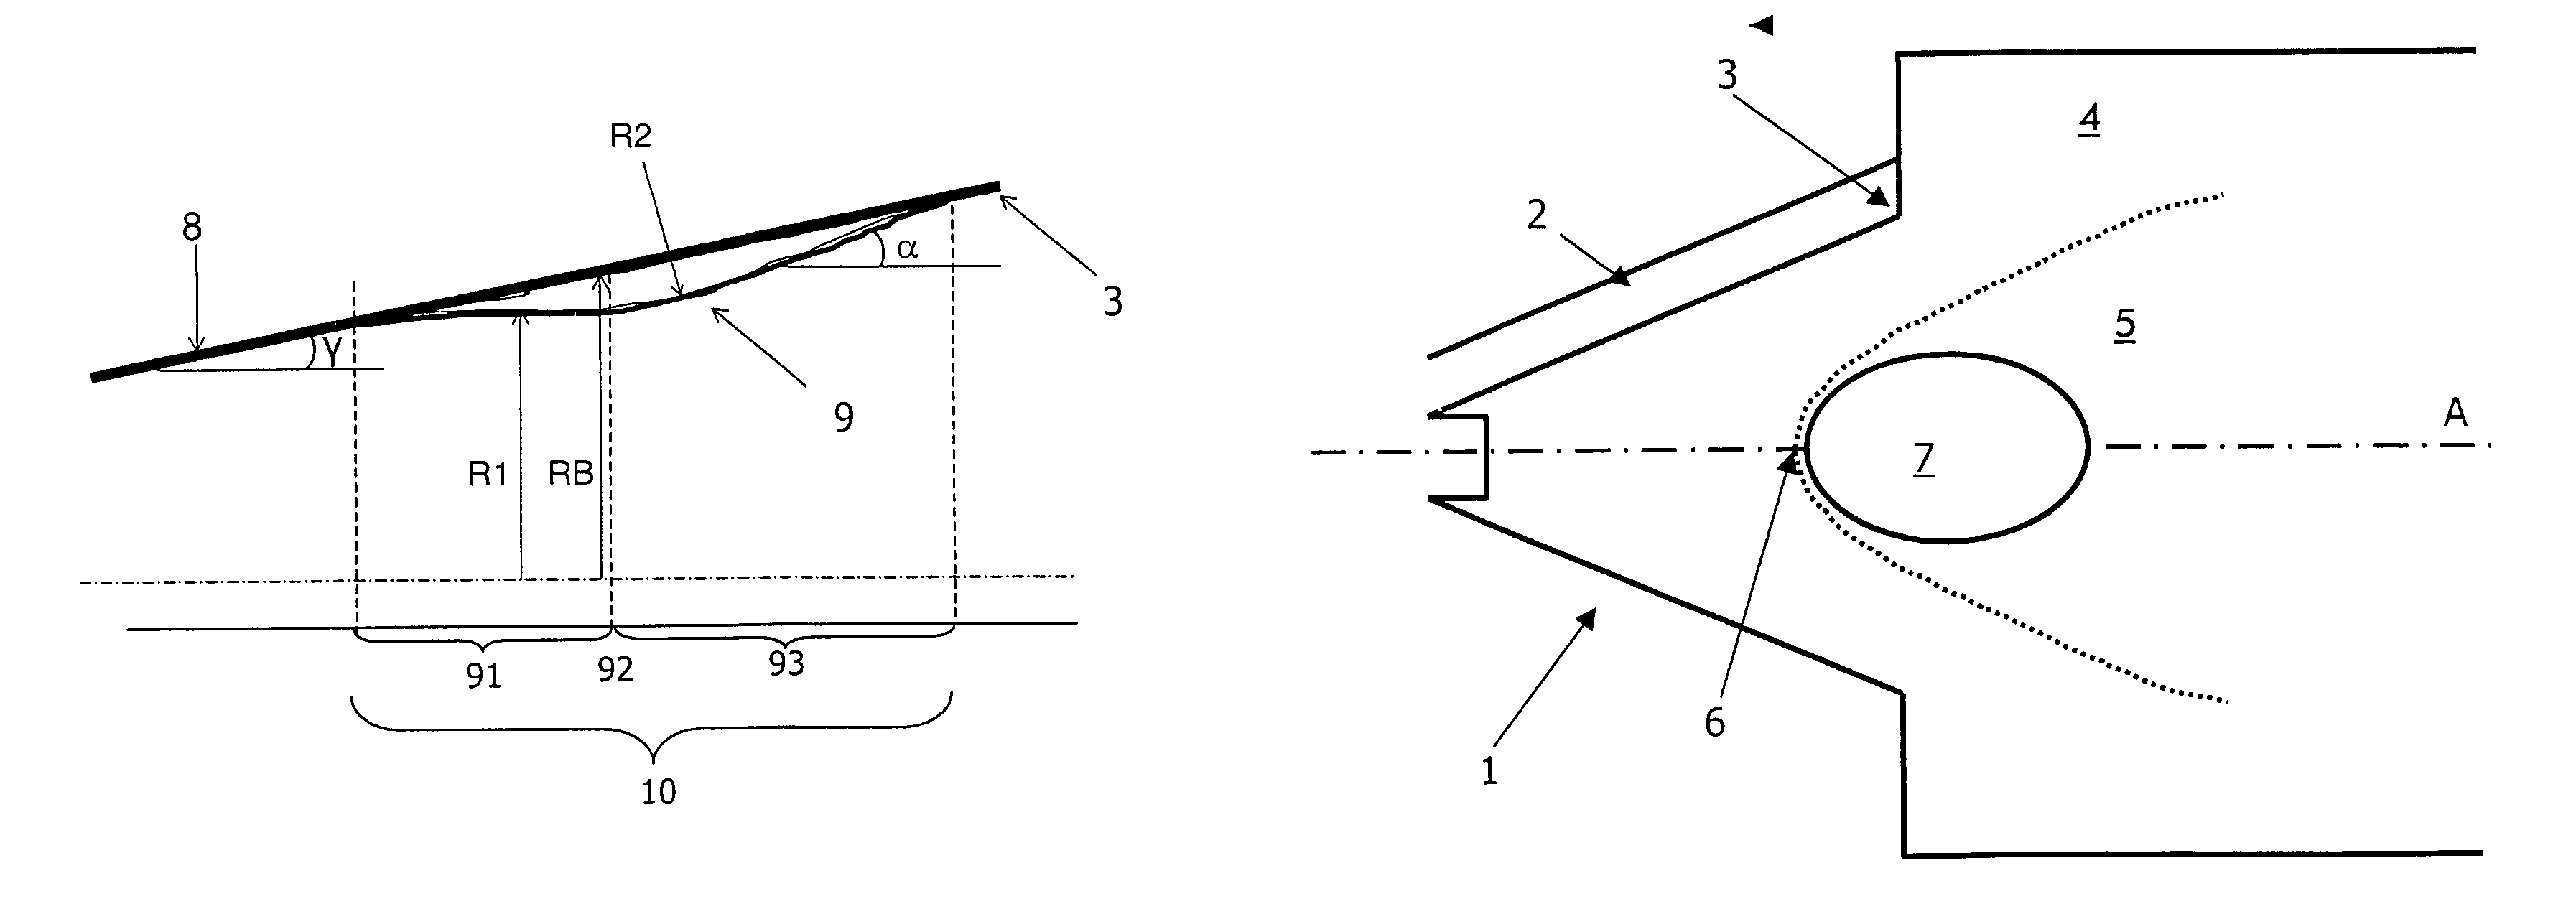 Premixing burner arrangement for operating a combustion chamber in addition to a method for operating a combustion chamber